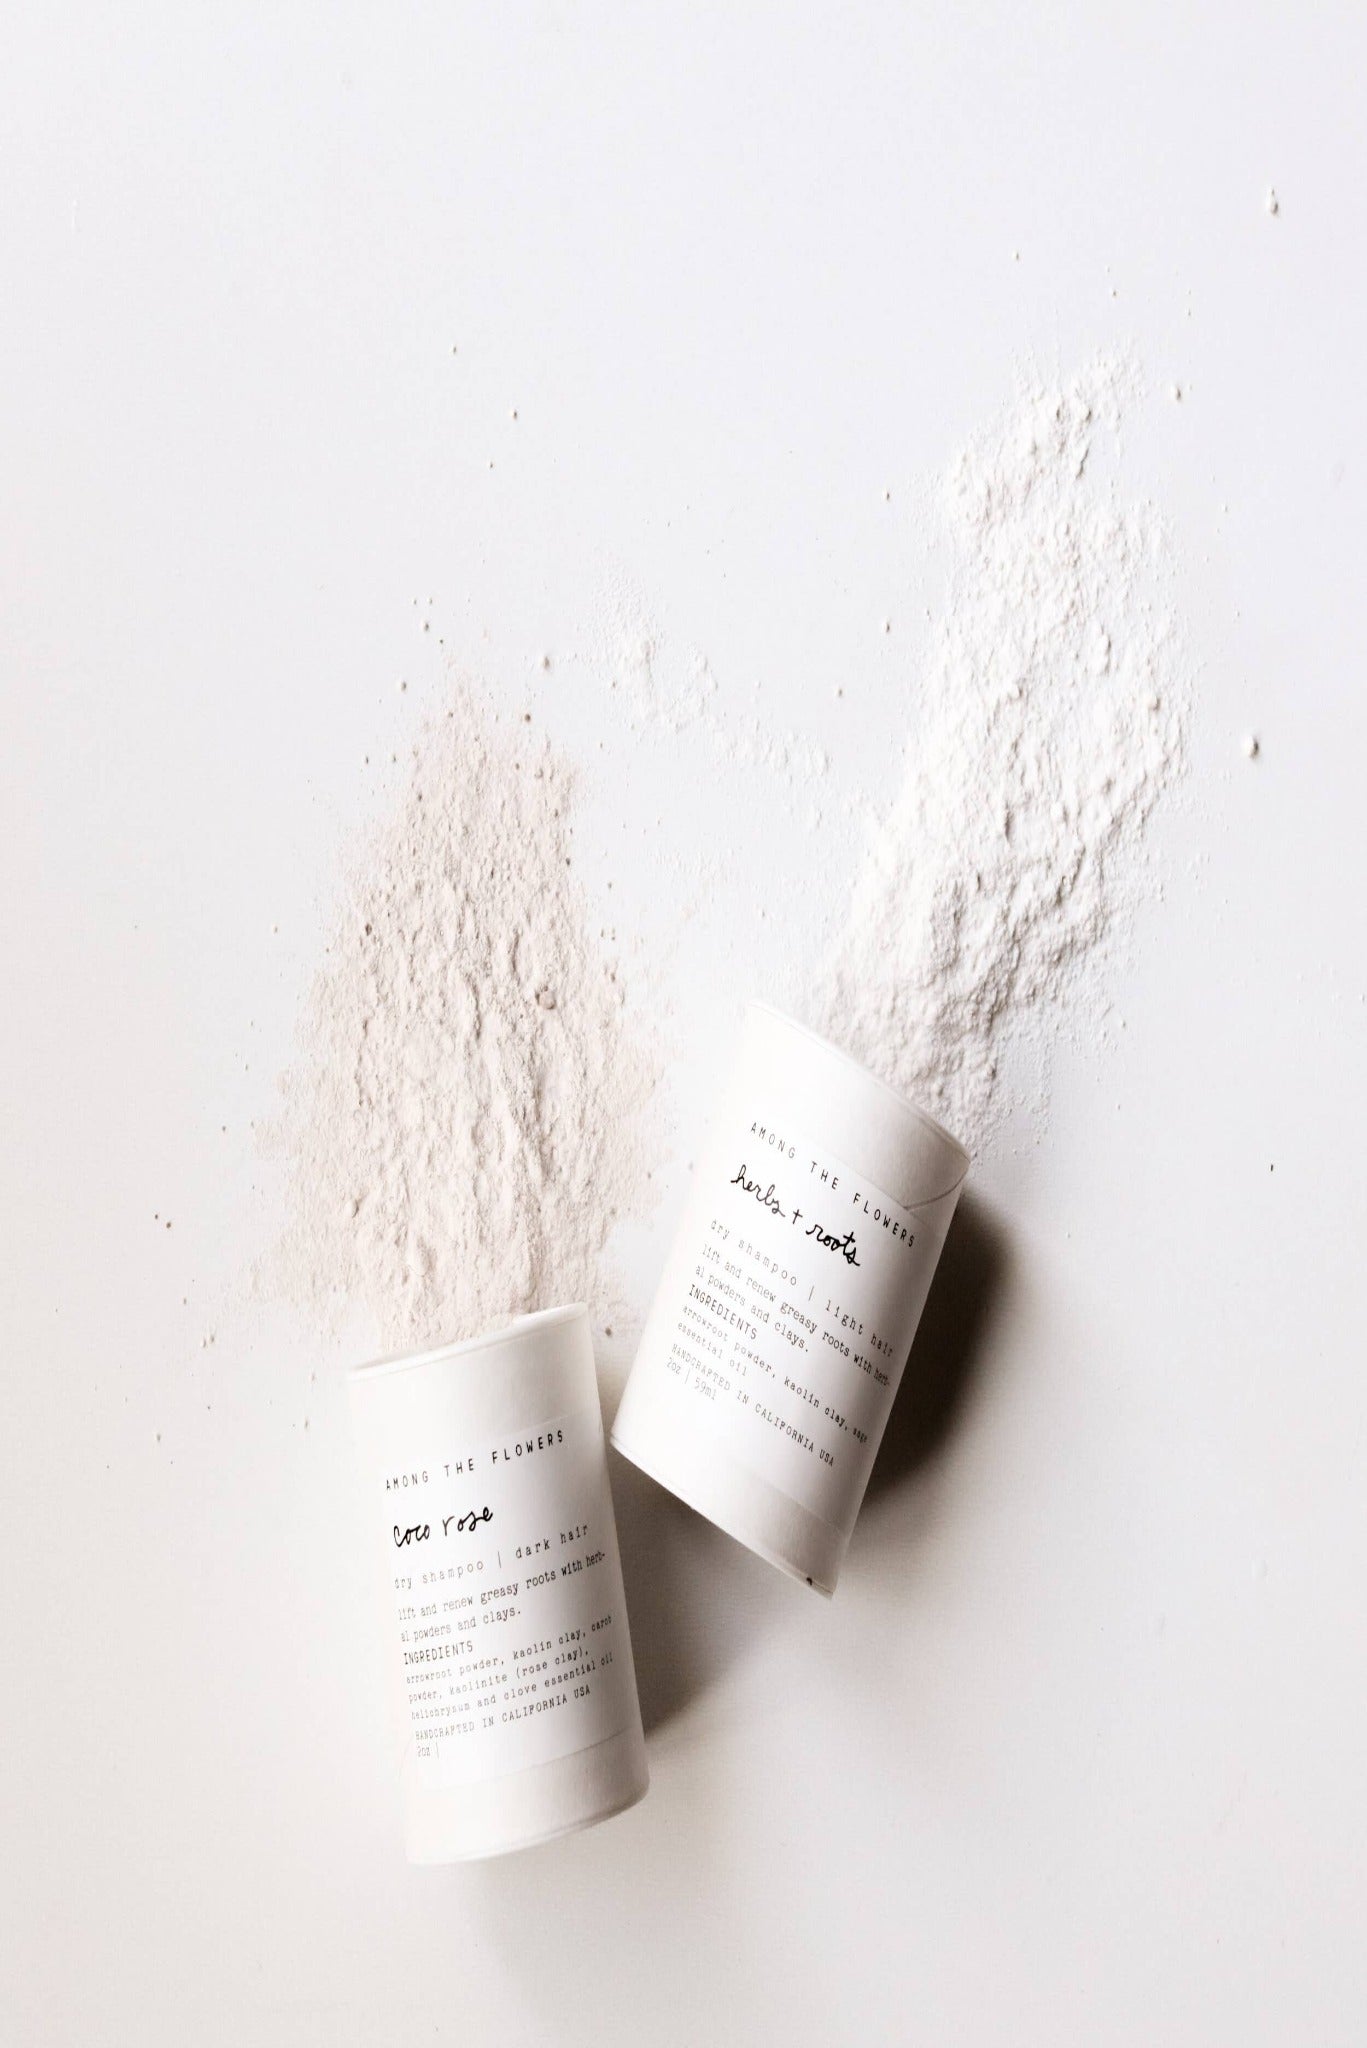 Dry Shampoo: Herbs and Root